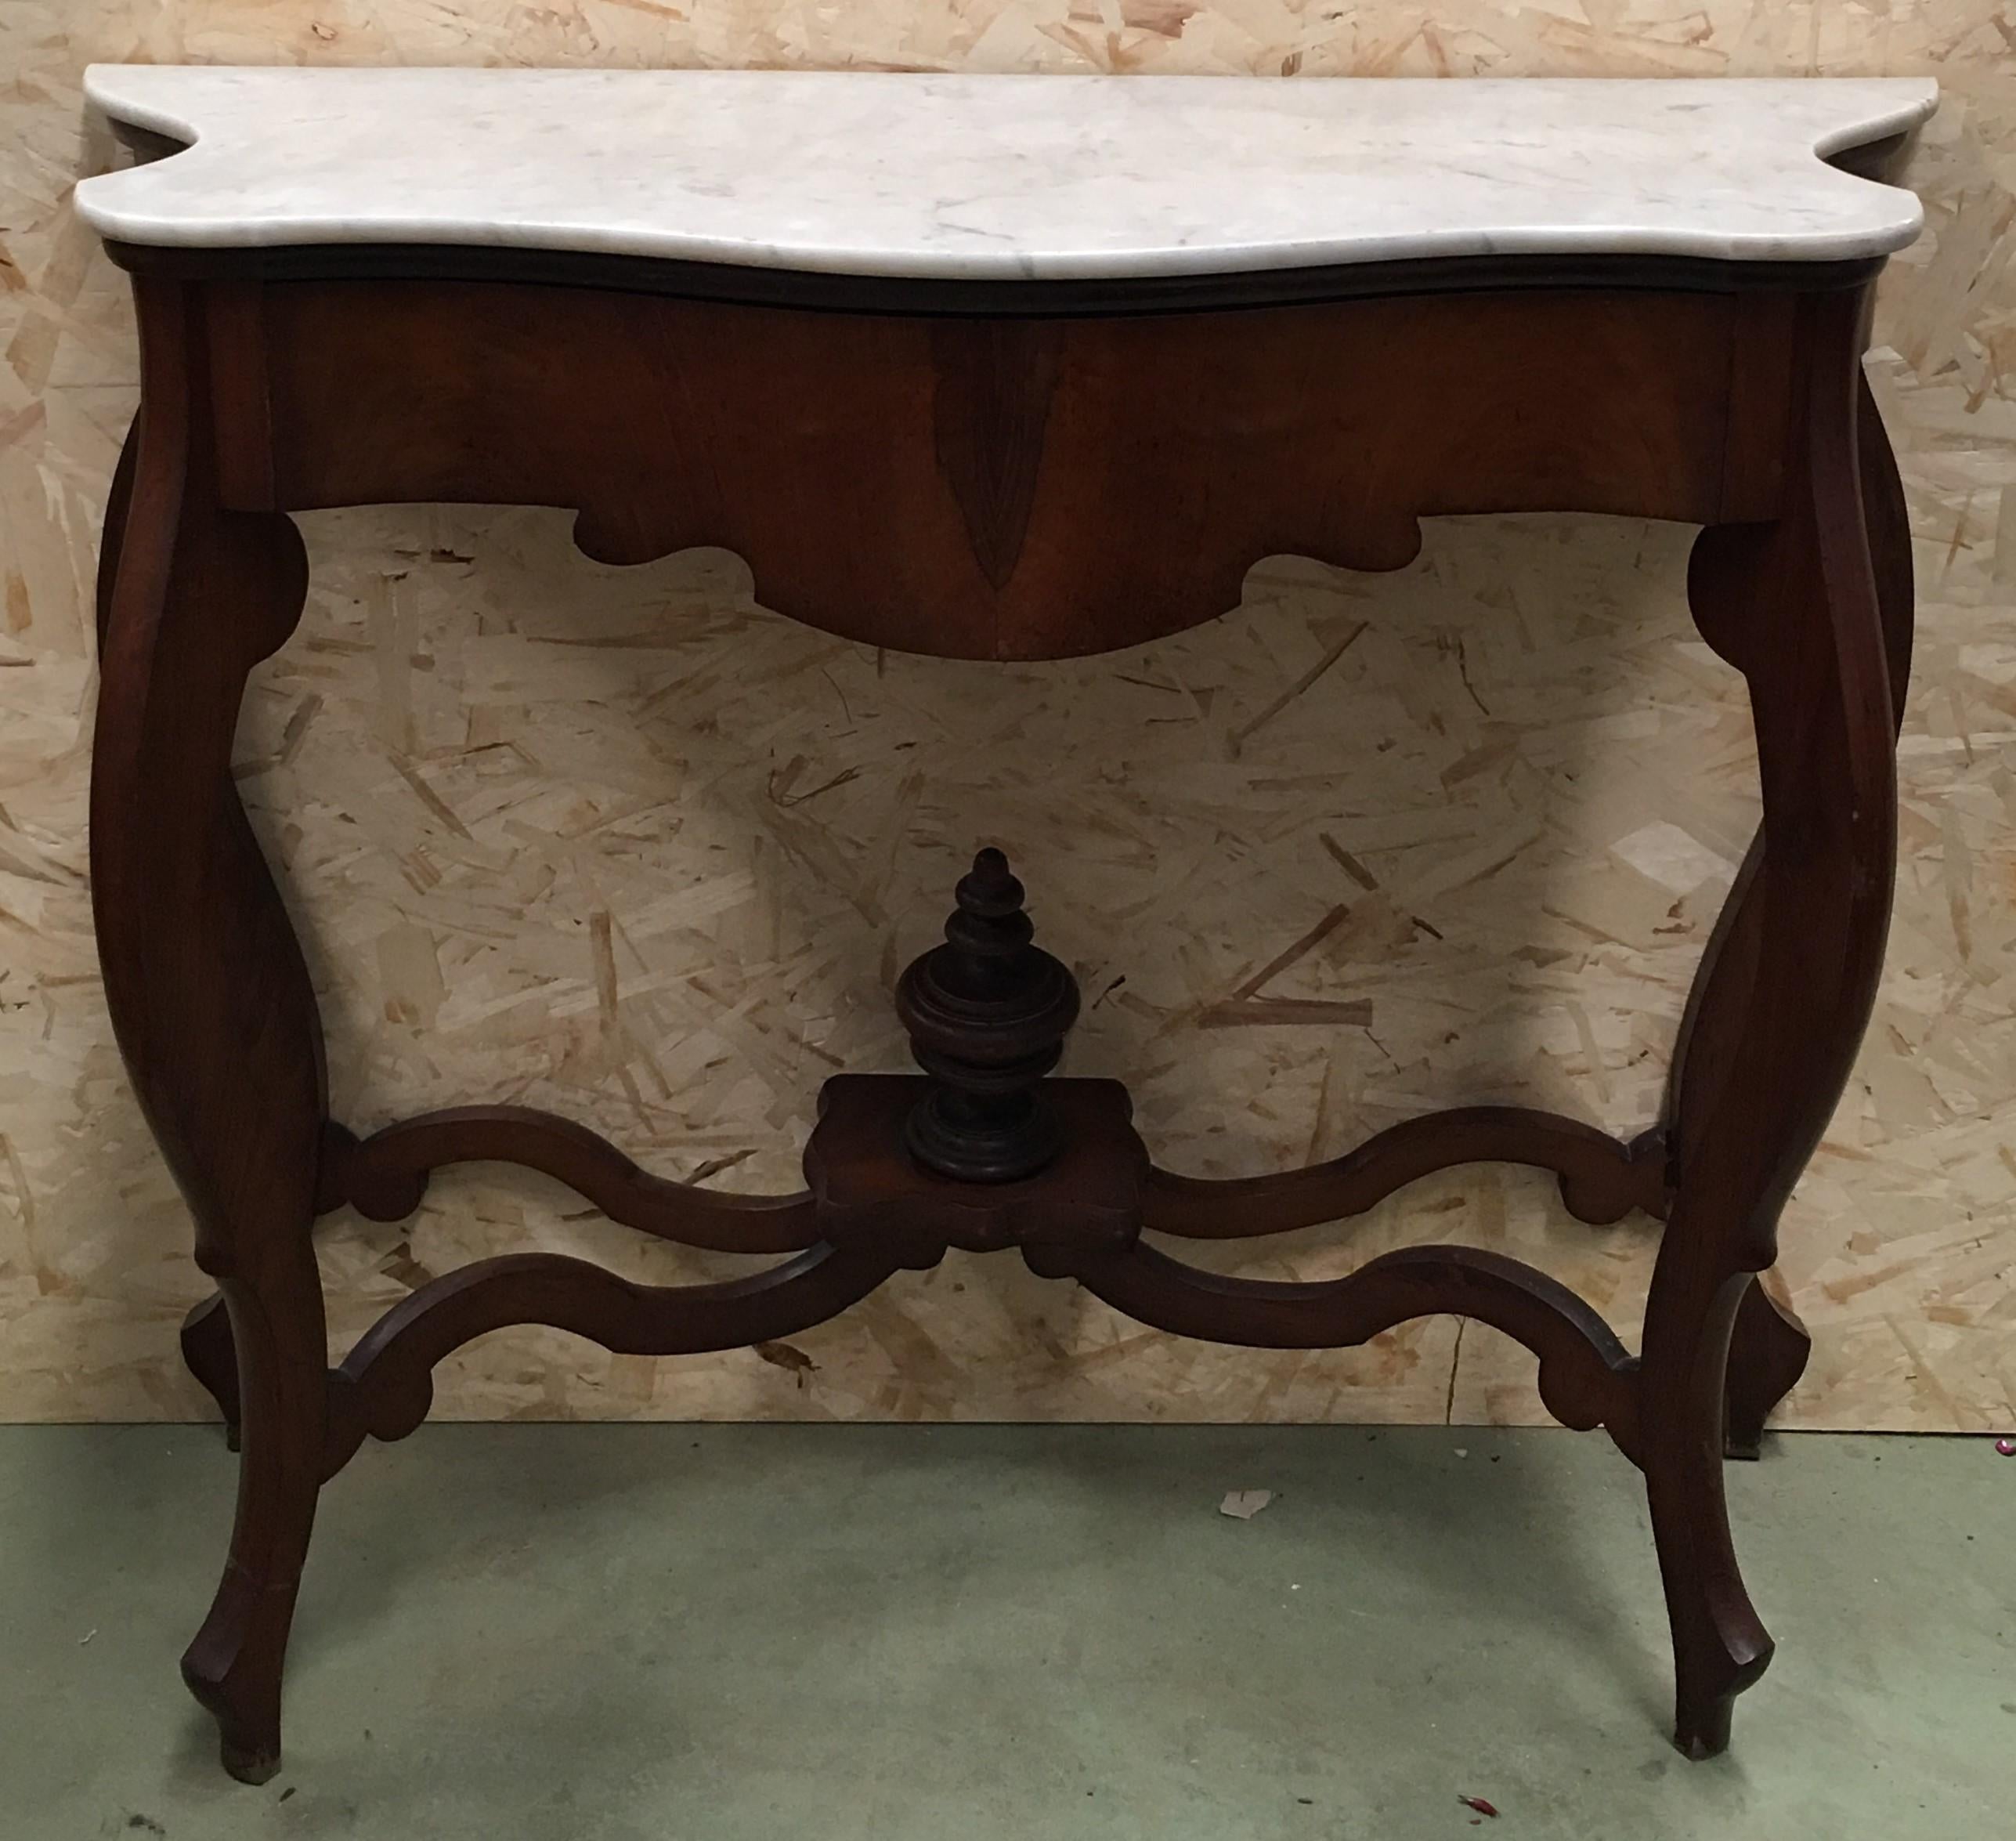 Walnut console table with four curved legs united by an urn stretcher beneath a marble top.